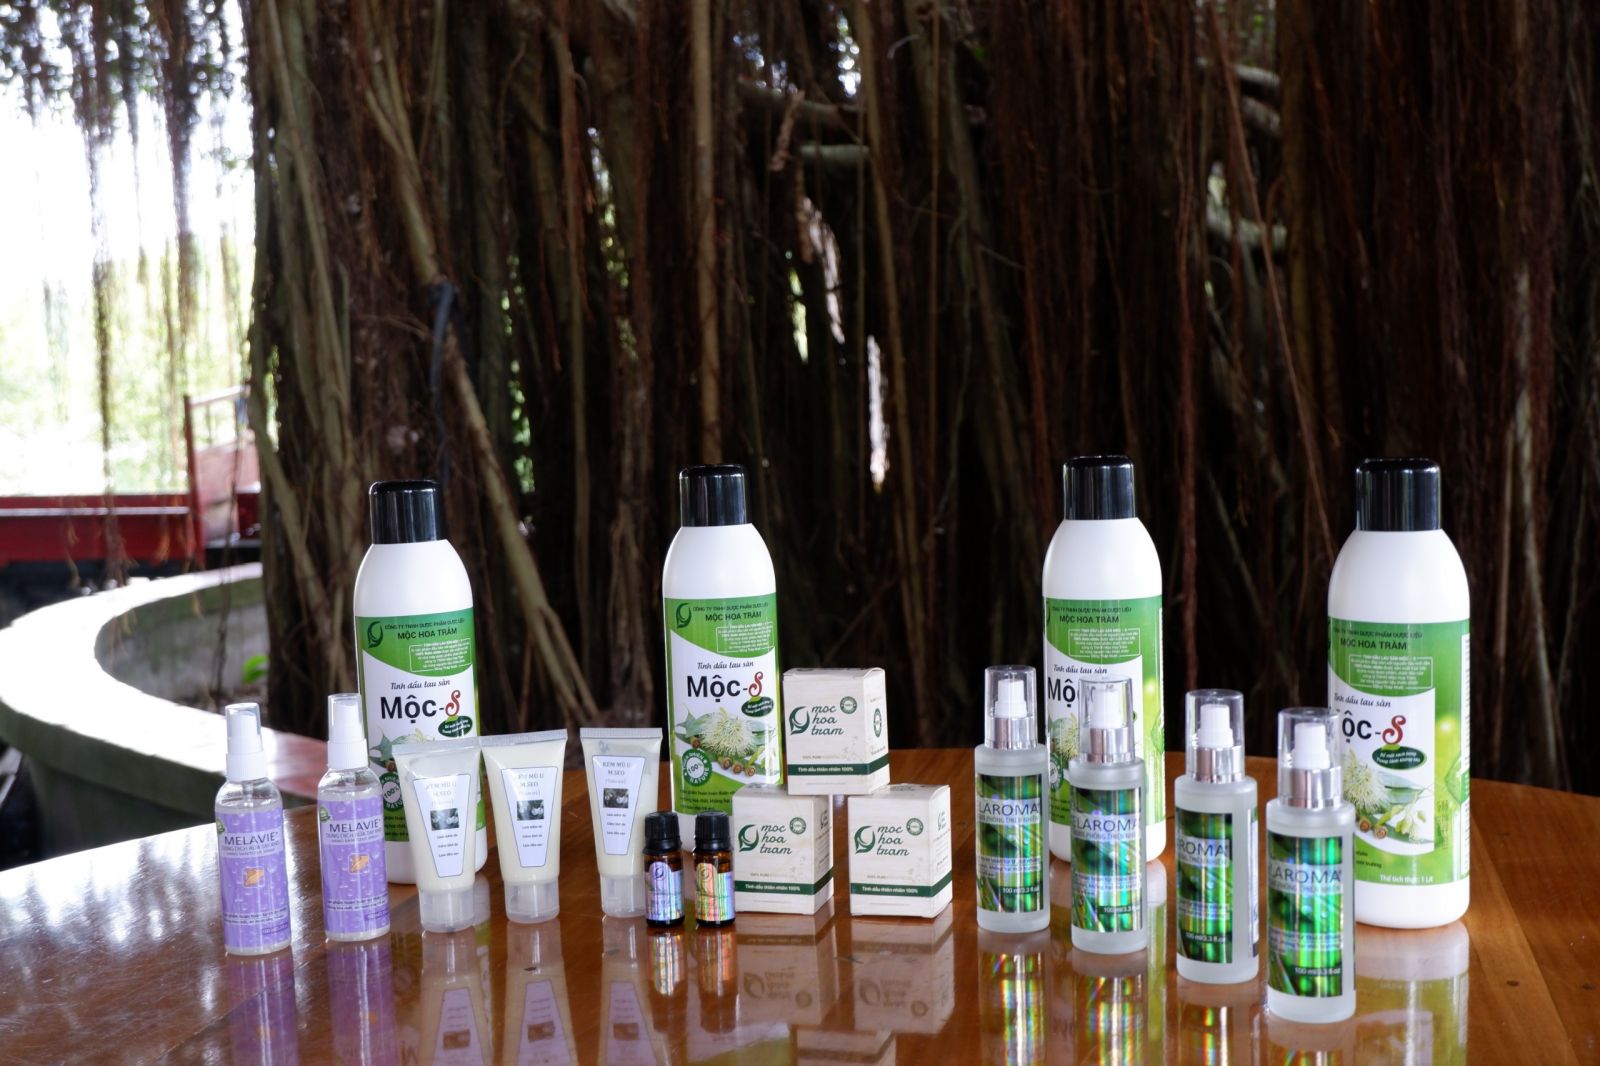 Visitors can buy products made from essential oils as gifts for friends and relatives after their trip to nature